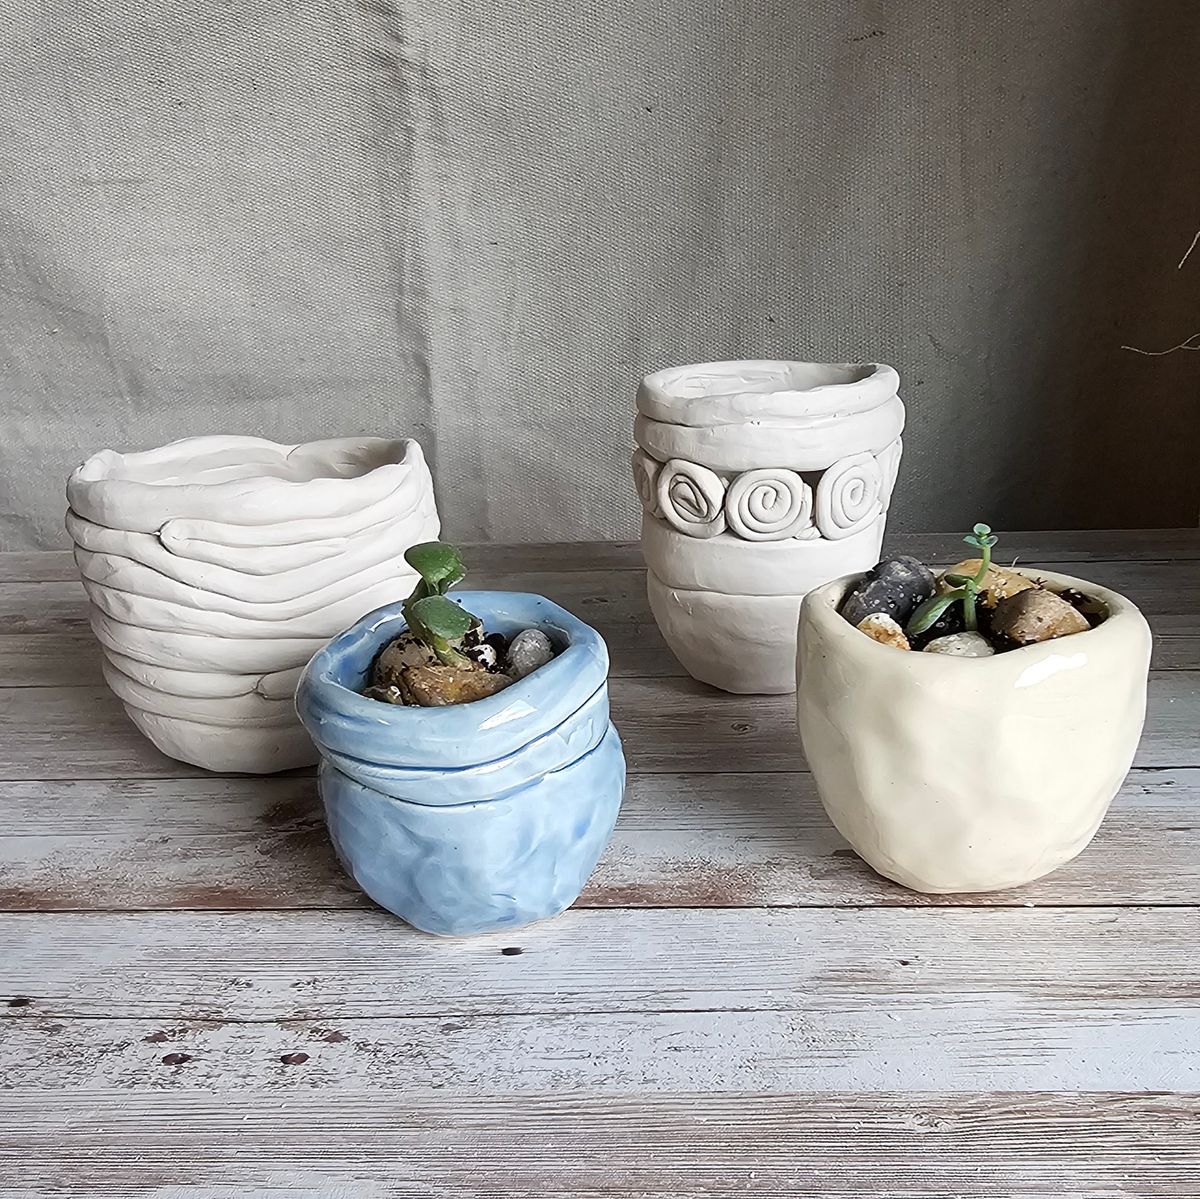 Plants and Pottery: Making Flower Pots